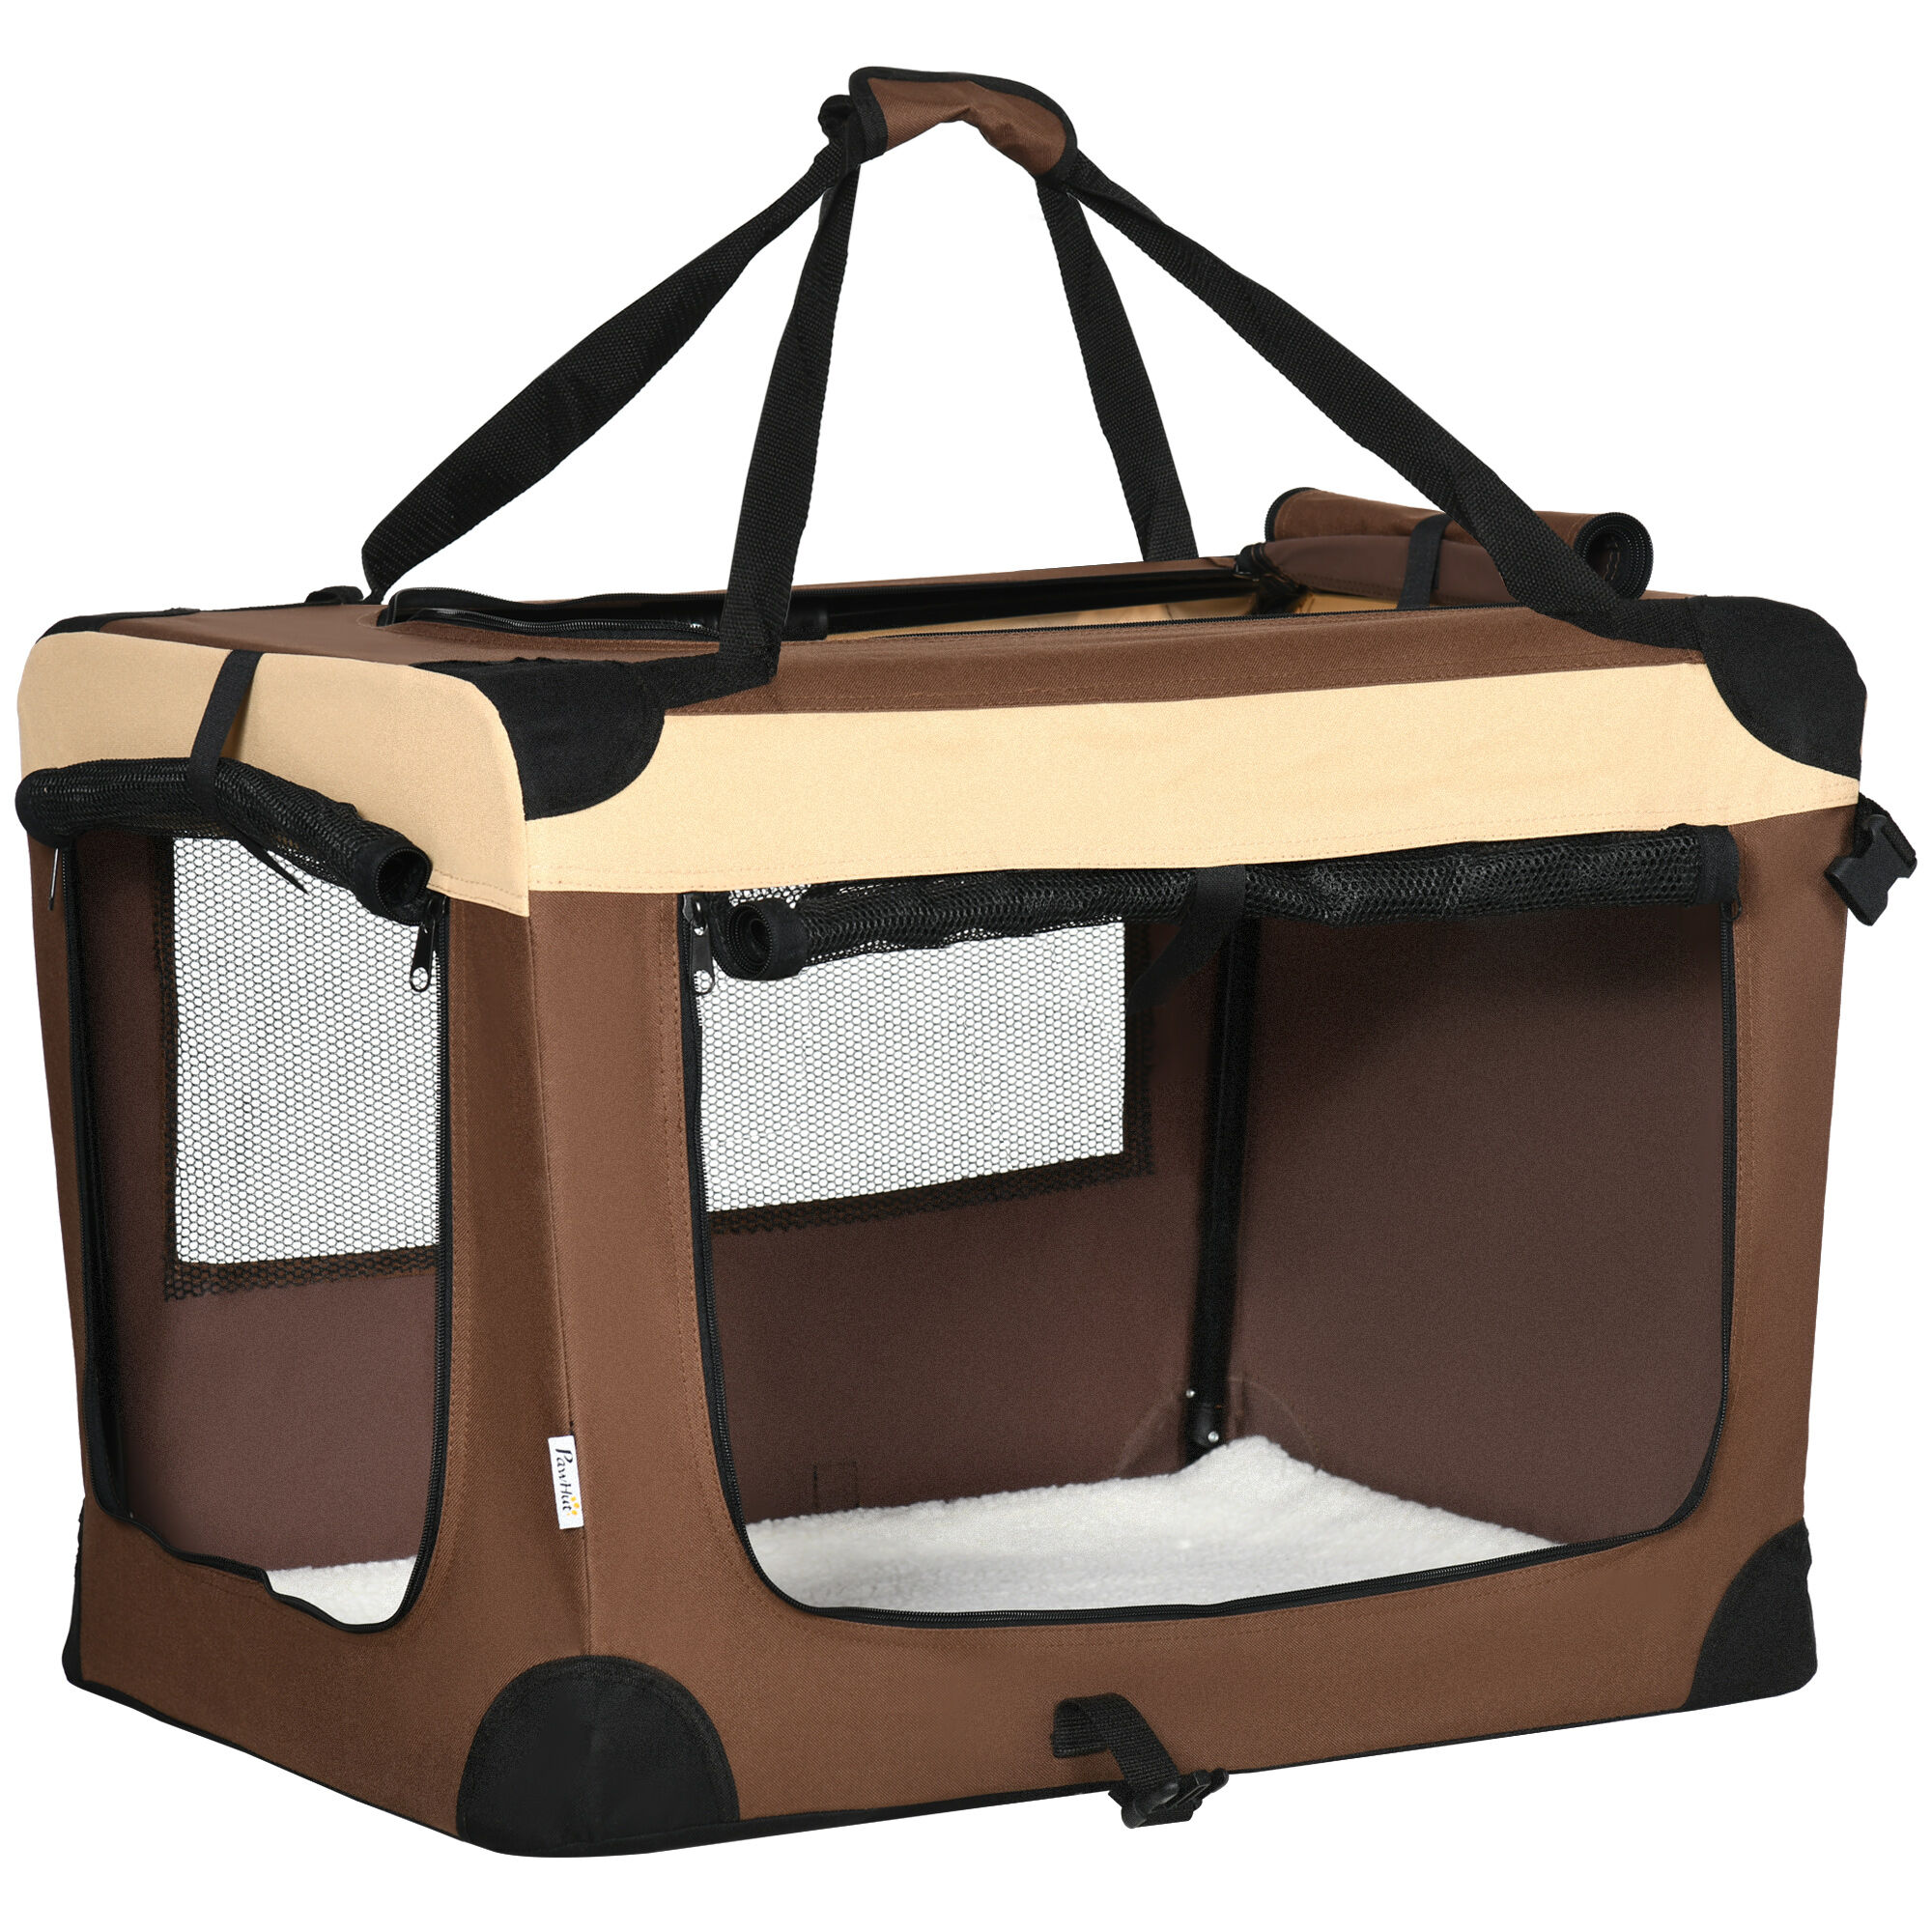 PawHut Pet Travel Carrier, Foldable Bag with Cushion for Cats and Small Dogs, Lightweight, 50x70x51cm, Brown